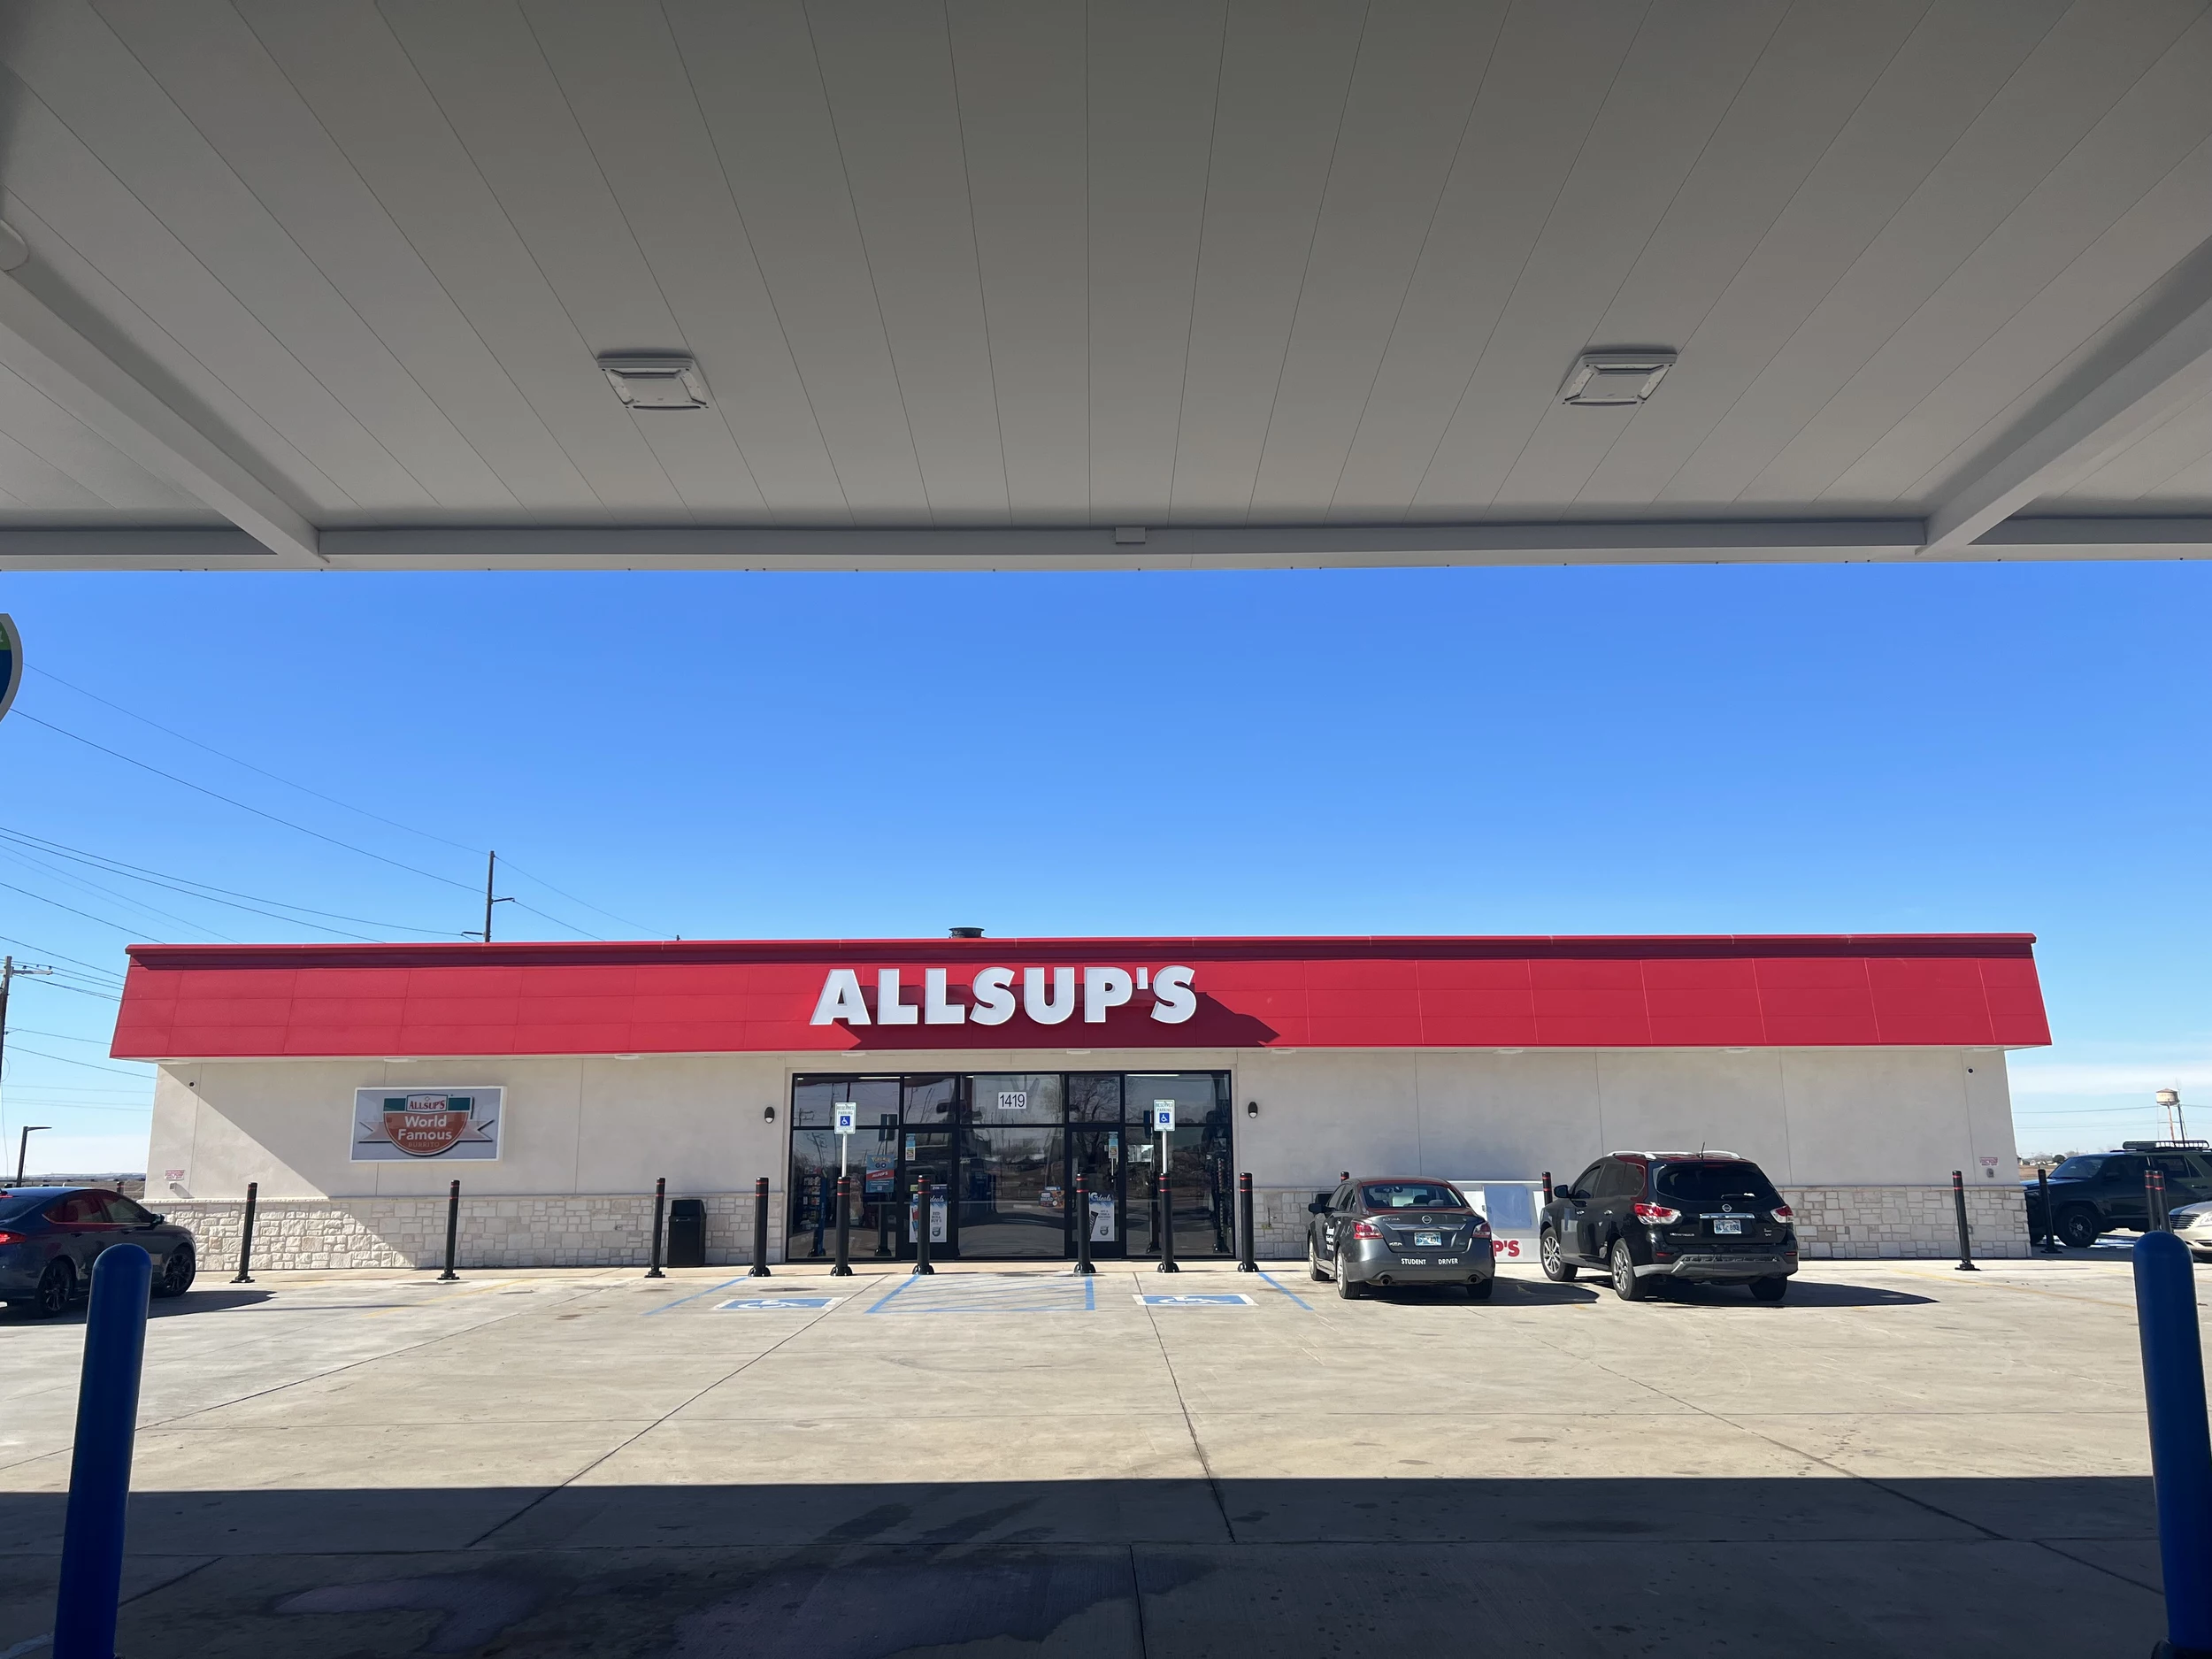 Allsups Confirmed It, Theyre Expanding Into Oklahoma